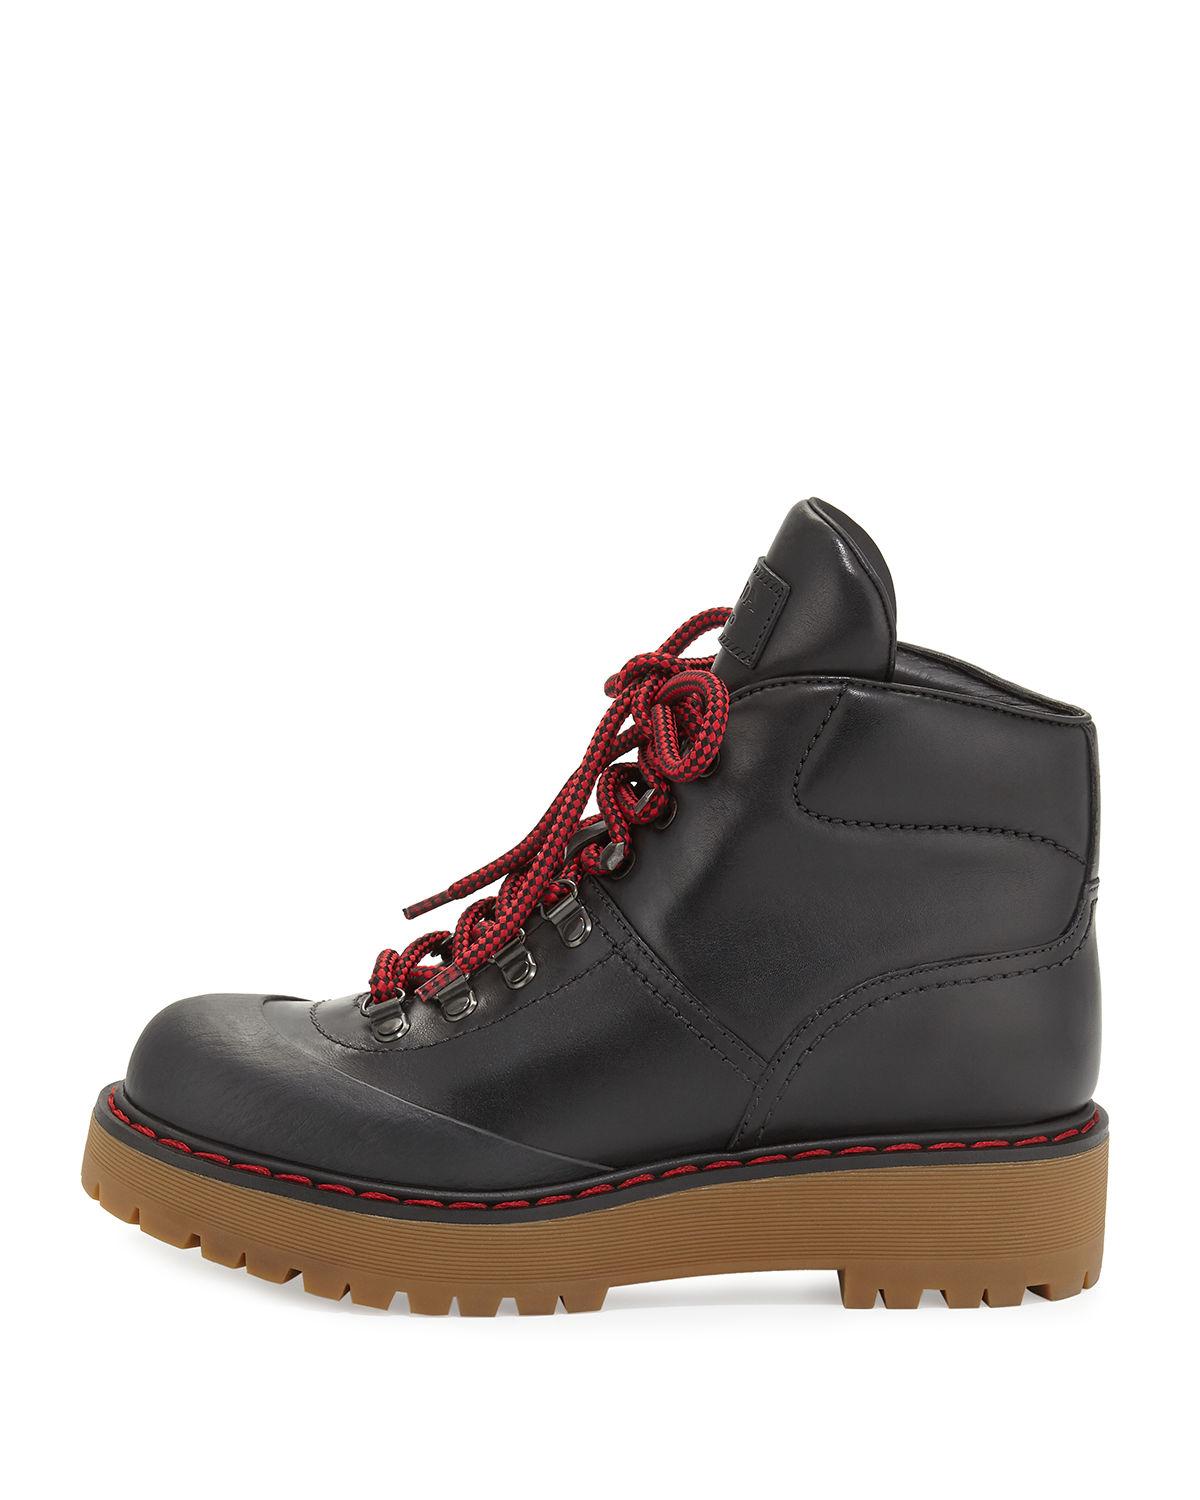 Lyst - Prada Lace-up Leather Hiking Boot in Black